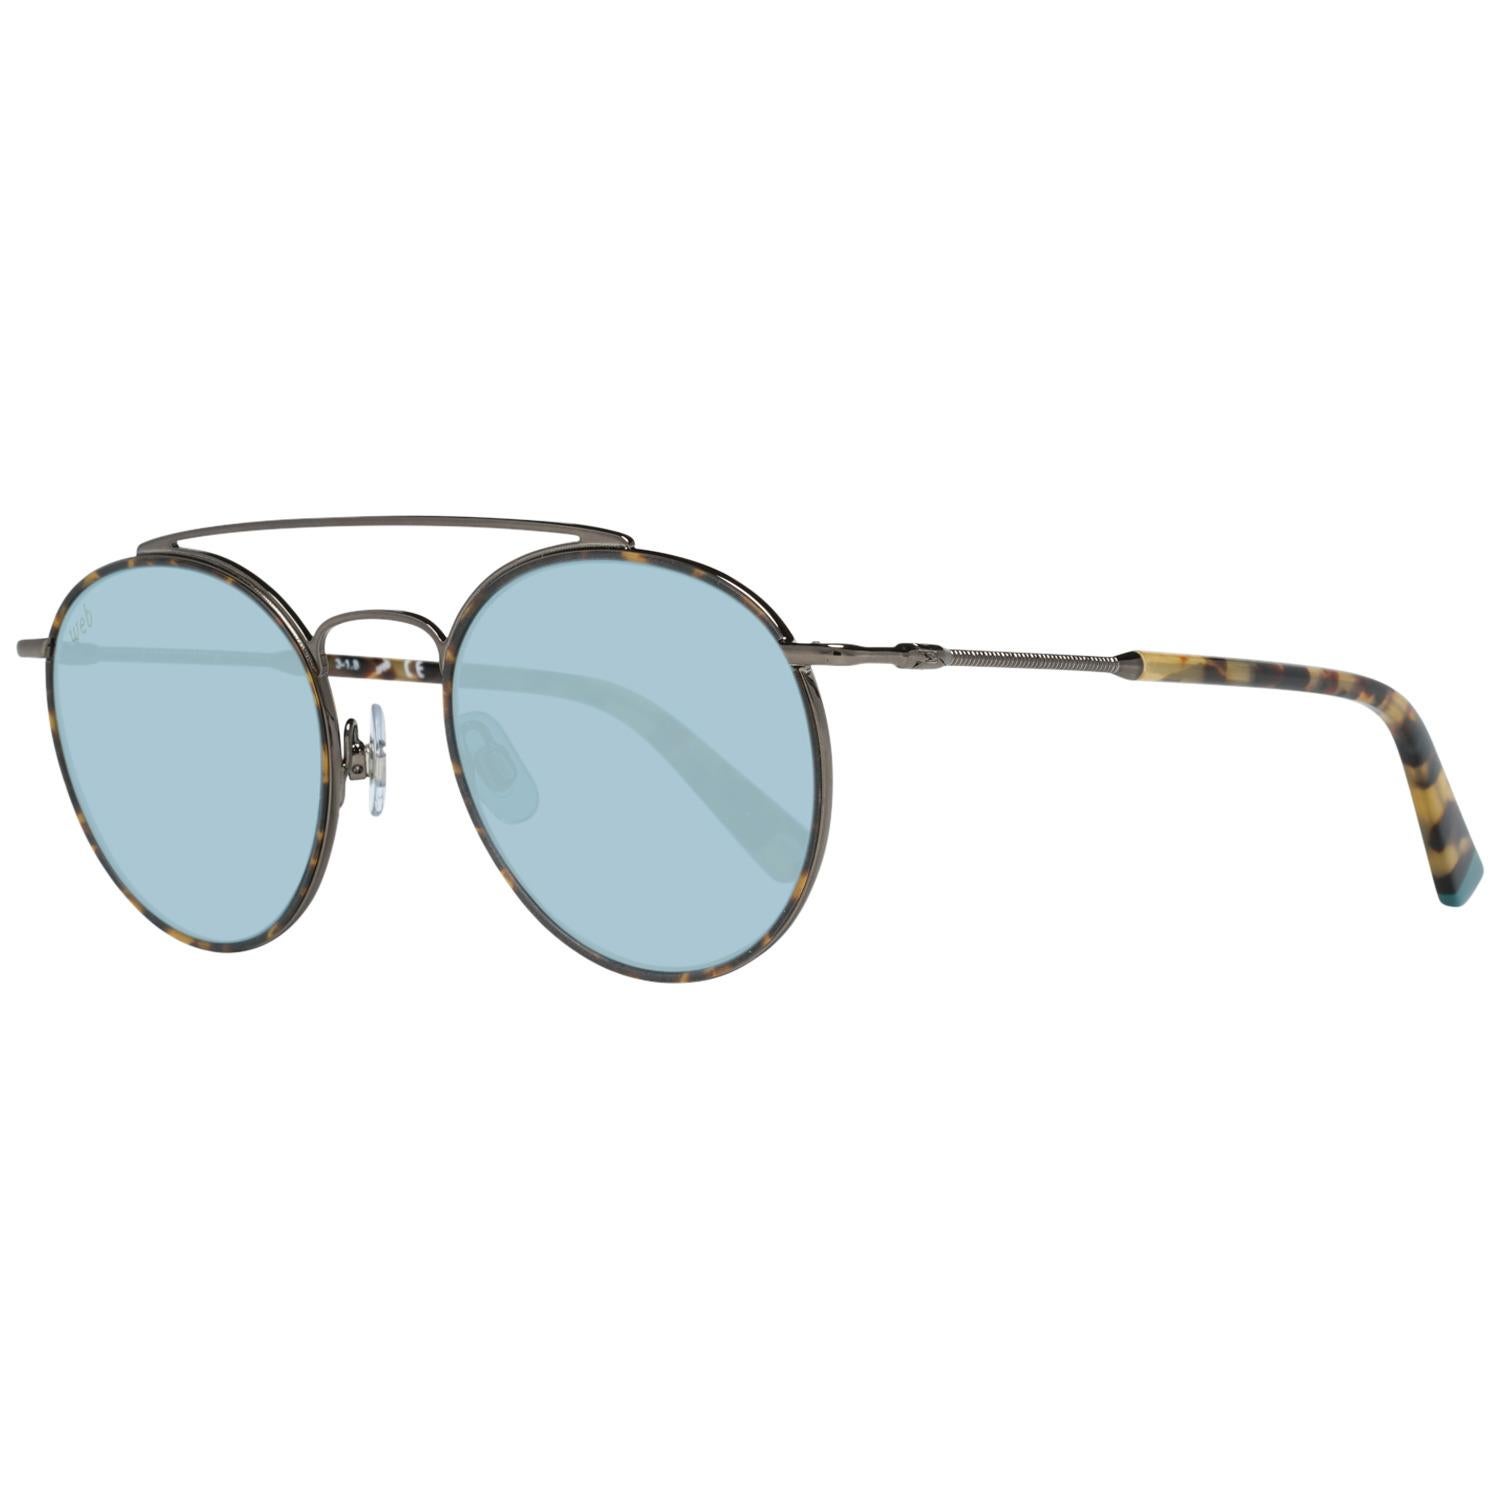 Details
MATERIAL: Metal
COLOR: Brown
MODEL: WE0188 5108X
GENDER: Adult Unisex
COUNTRY OF MANUFACTURE: China
TYPE: Sunglasses
ORIGINAL CASE?: Yes
STYLE: Round
OCCASION: Casual
FEATURES: Lightweight
LENS COLOR: Blue
LENS TECHNOLOGY: No Extra
YEAR